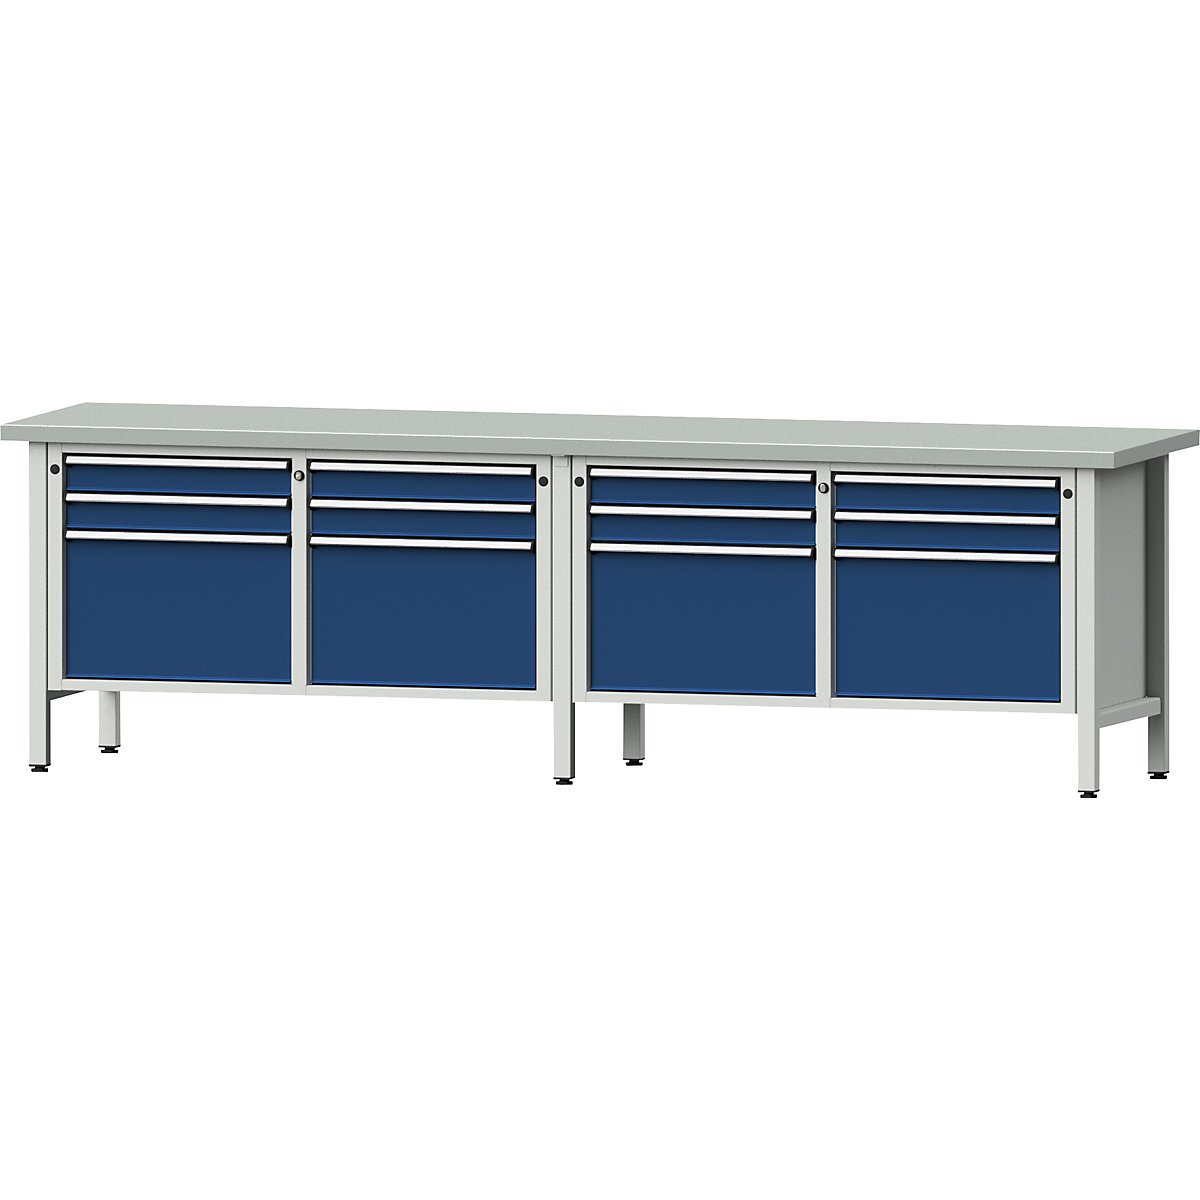 Workbench width 2800 mm, frame construction – ANKE, 12 drawers, 8 x 90 mm, 4 x 360 mm, sheet steel covered worktop-8